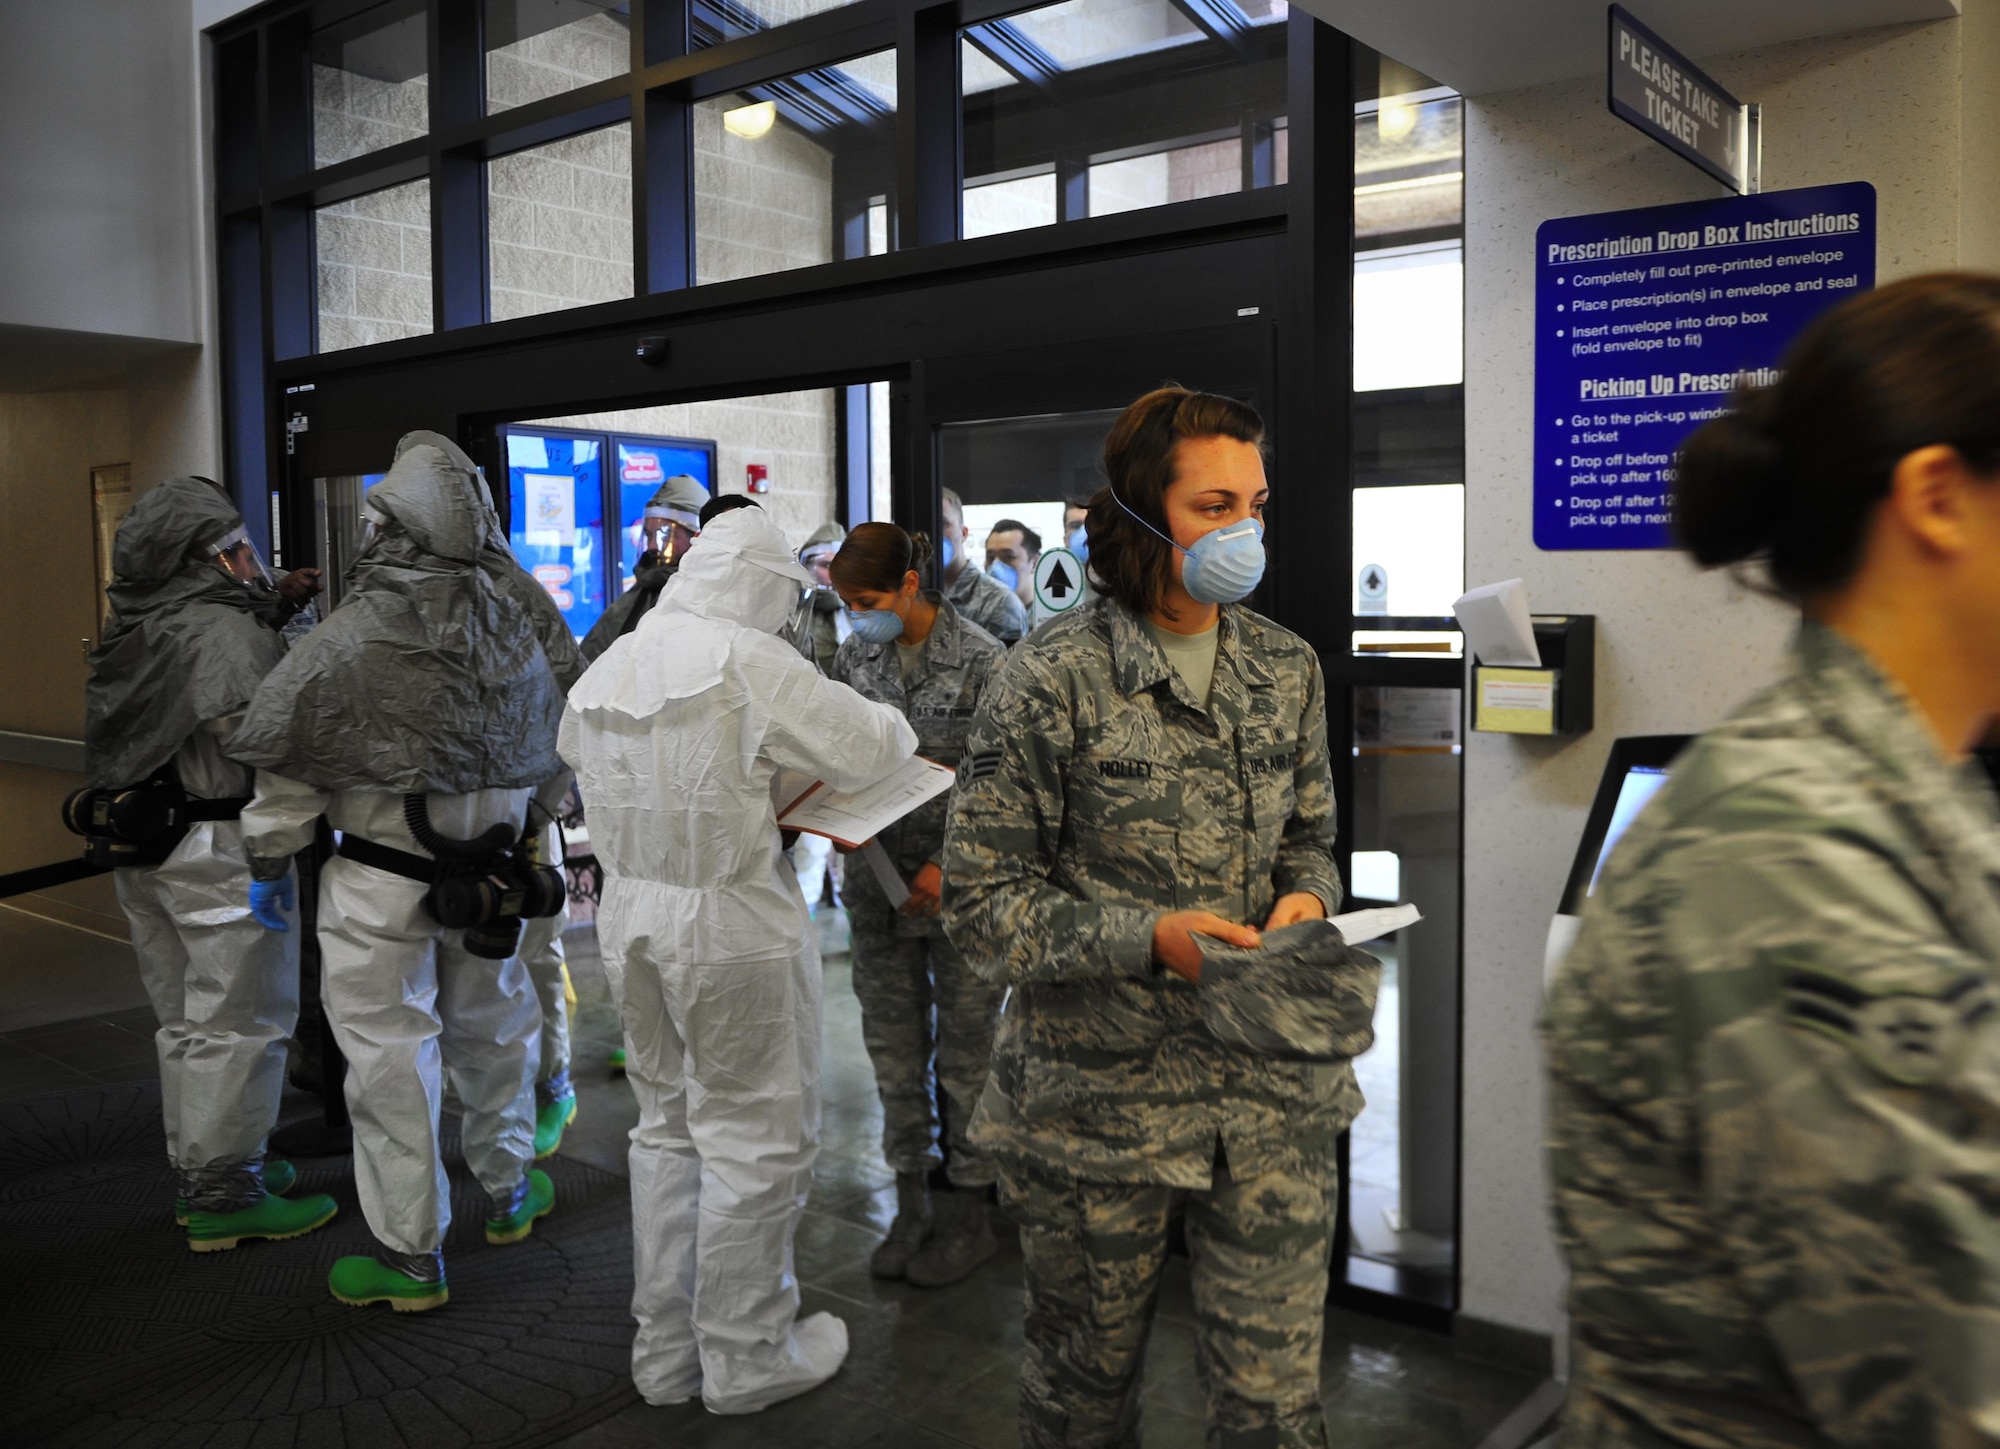 Airmen from the 1st Special Operations Medical Group participated in a disease containment exercise at Hurlburt Field, Fla., Feb. 4, 2015. The purpose of the exercise was to ensure all medical personnel are properly trained to react to a disease outbreak on base as well as in the community. (U.S. Air Force photo/Senior Airman Christopher Callaway)